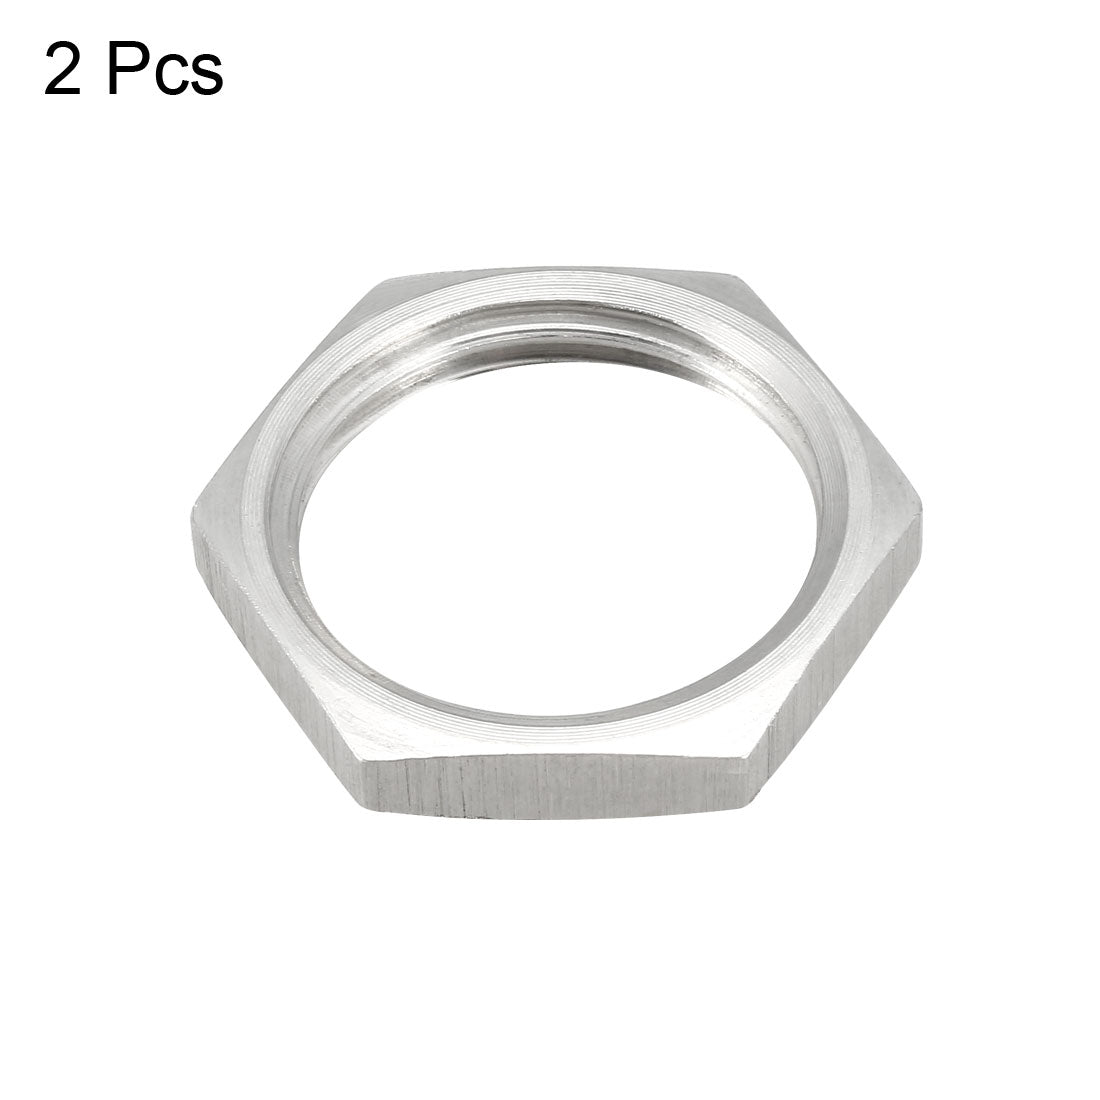 uxcell Uxcell Pipe Fitting Hex Locknut SUS304 Stainless Steel G1/2 Inch Female Threaded, 2 Pcs